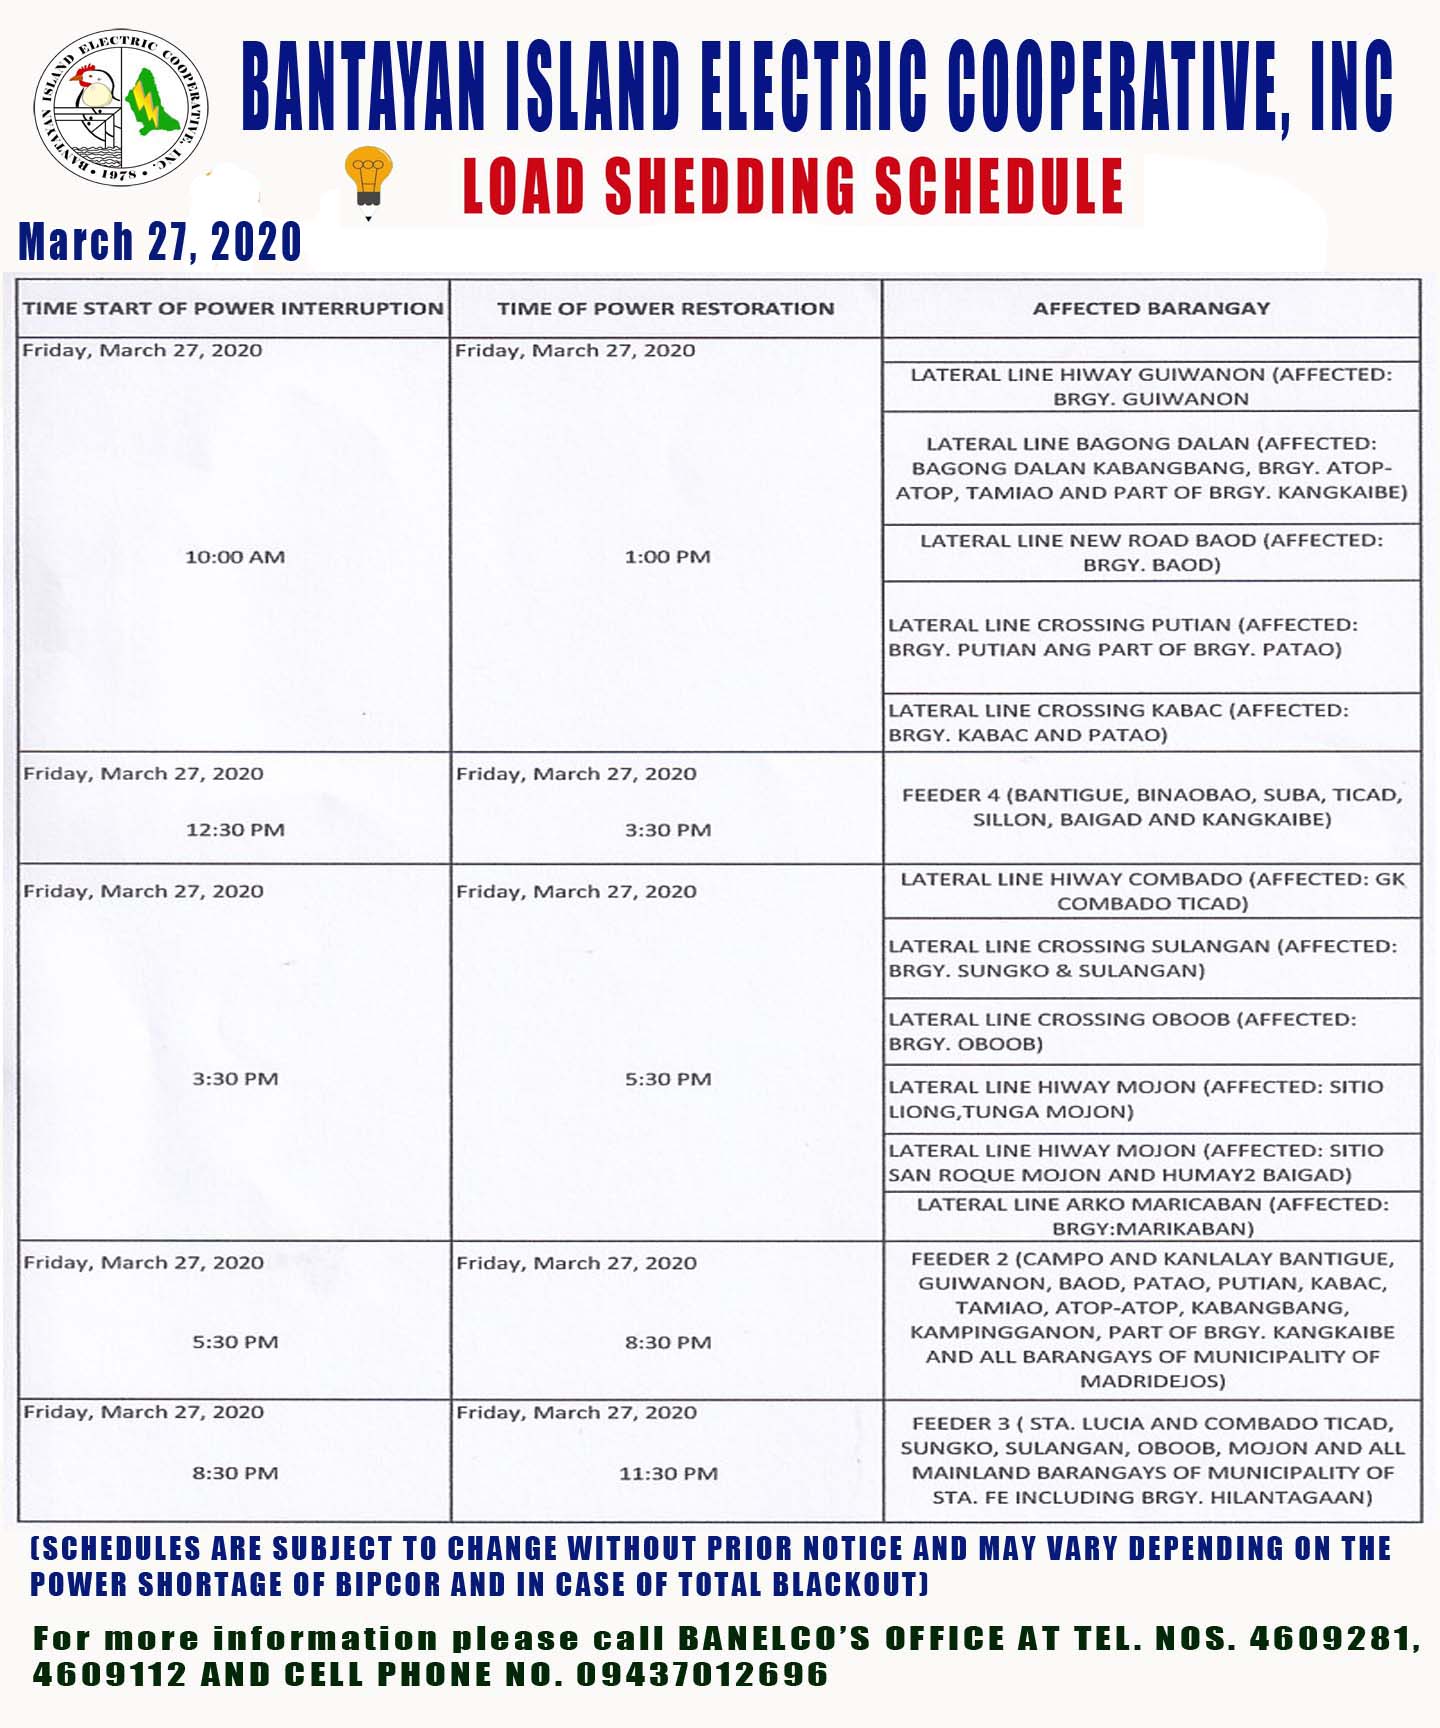 BANELCO-LOAD-SHEDDING-MARCH-18-2020